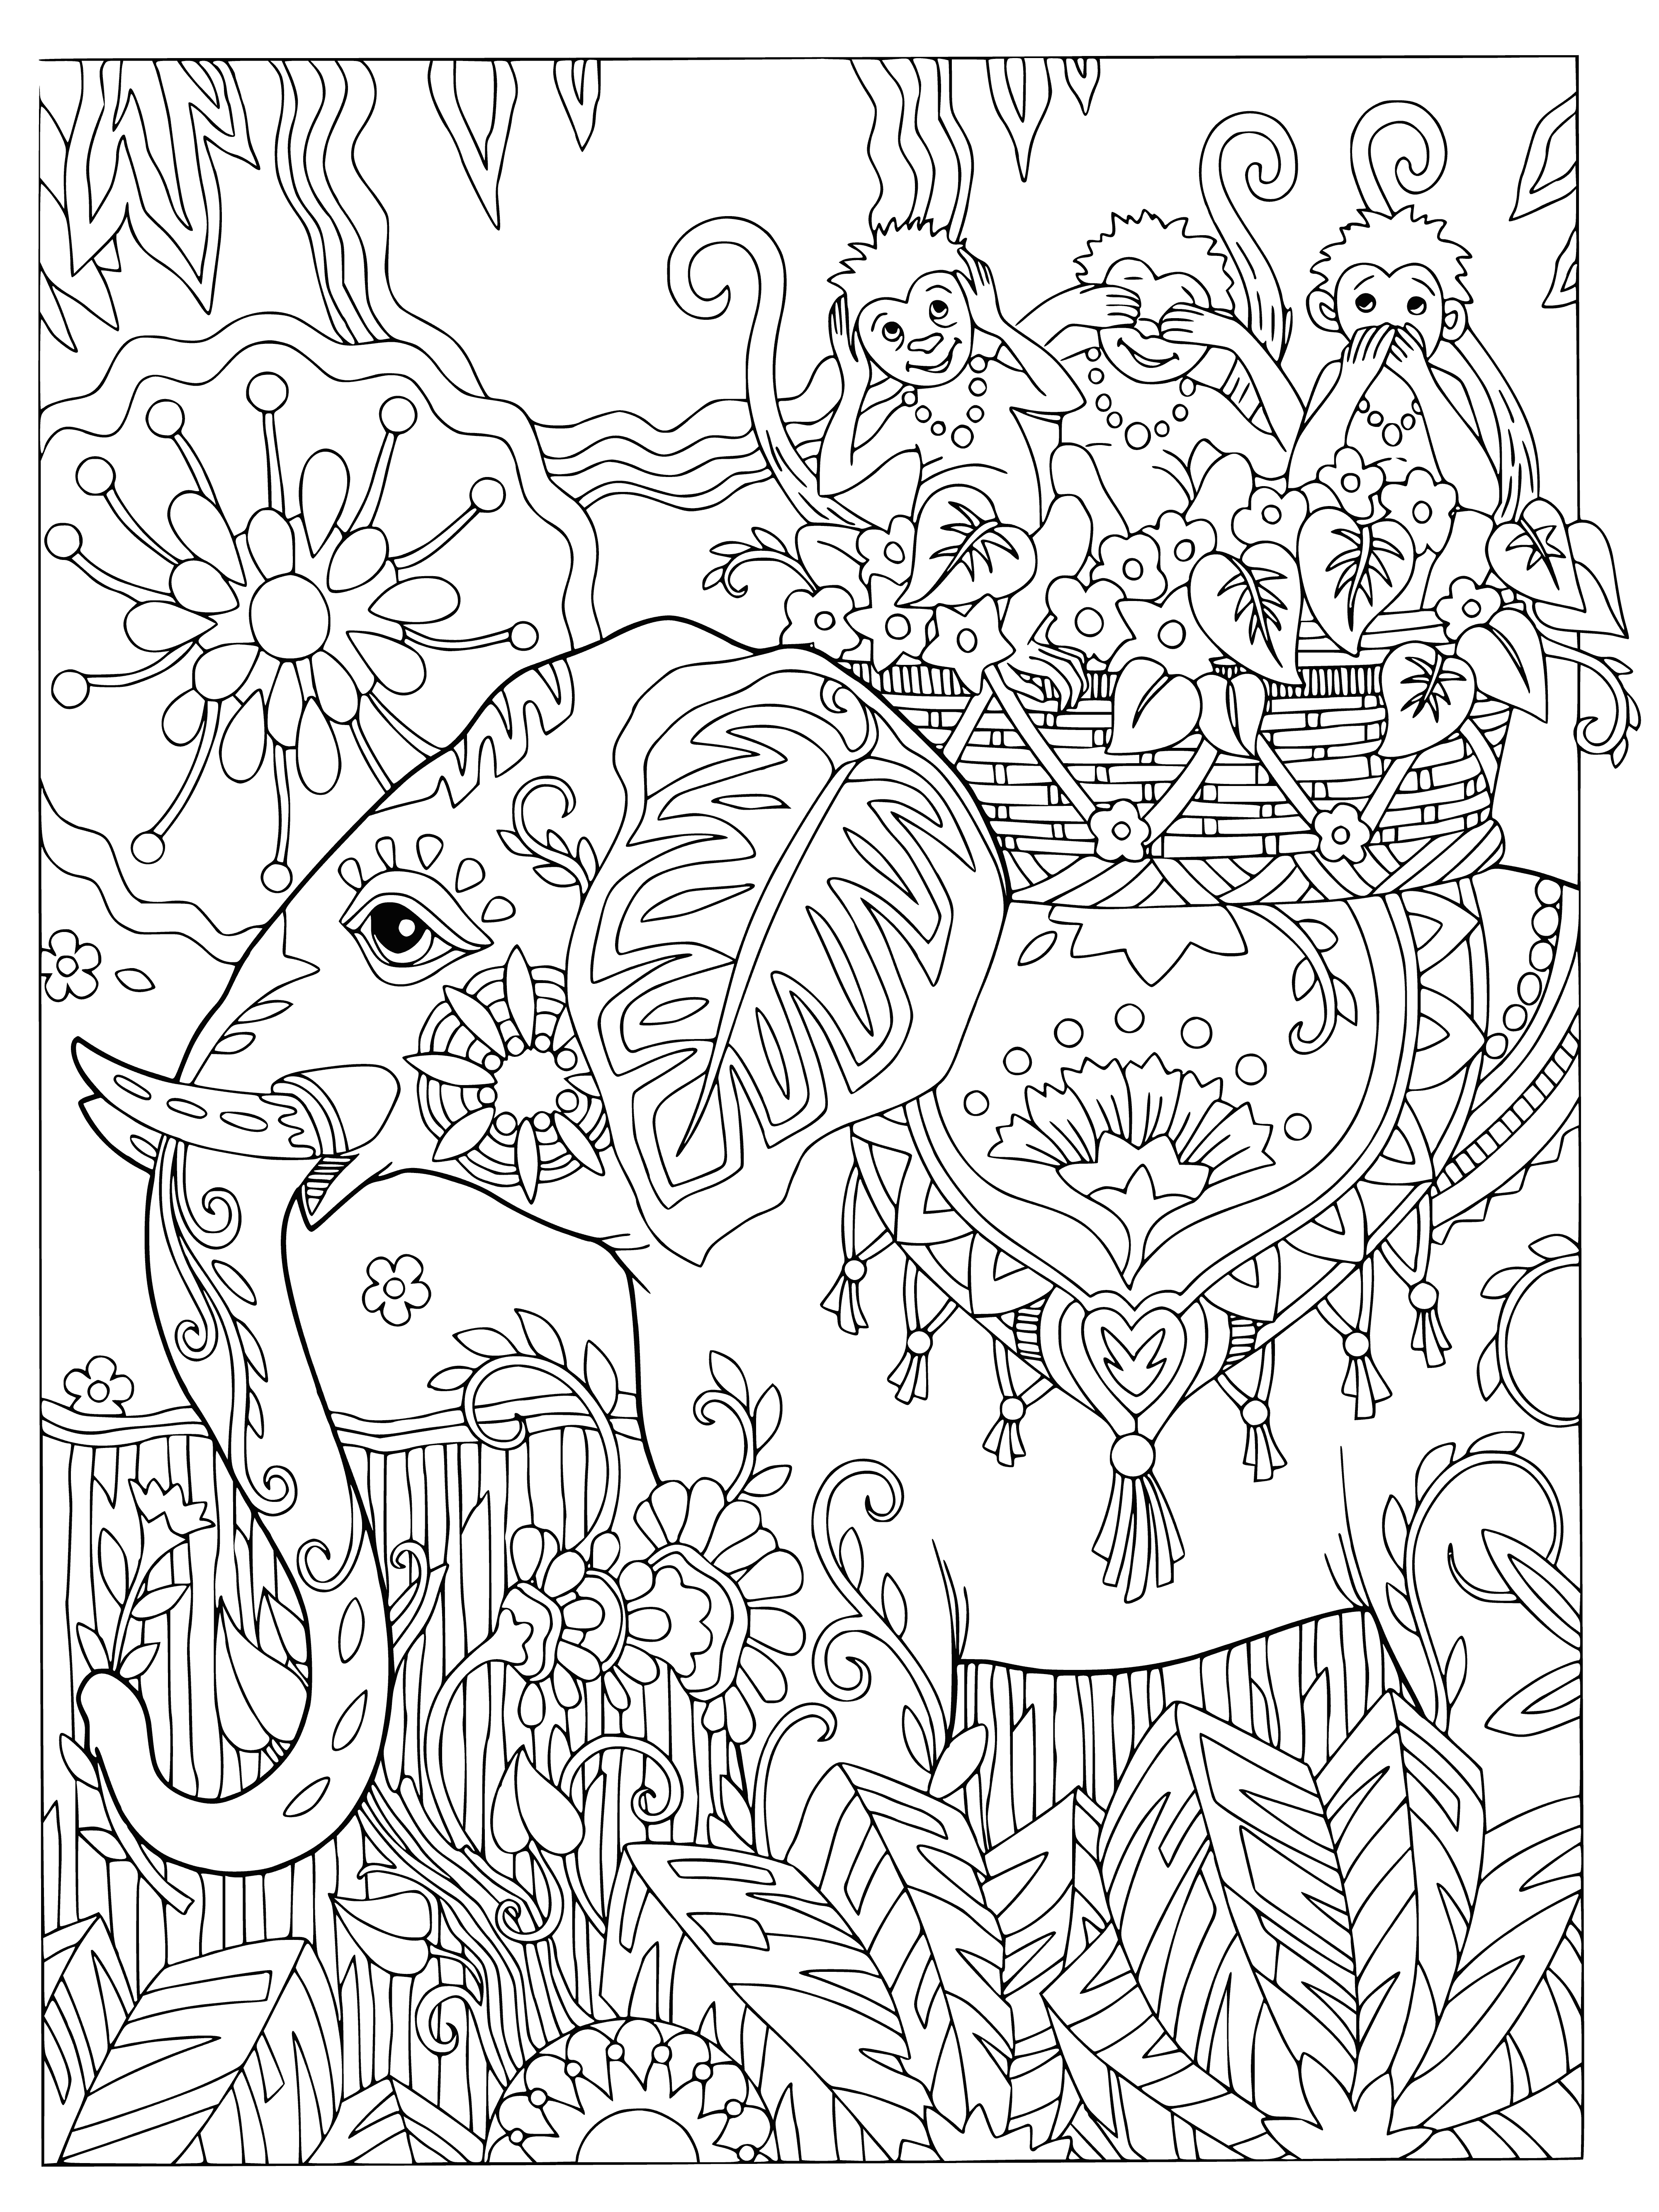 Elephant and monkeys coloring page